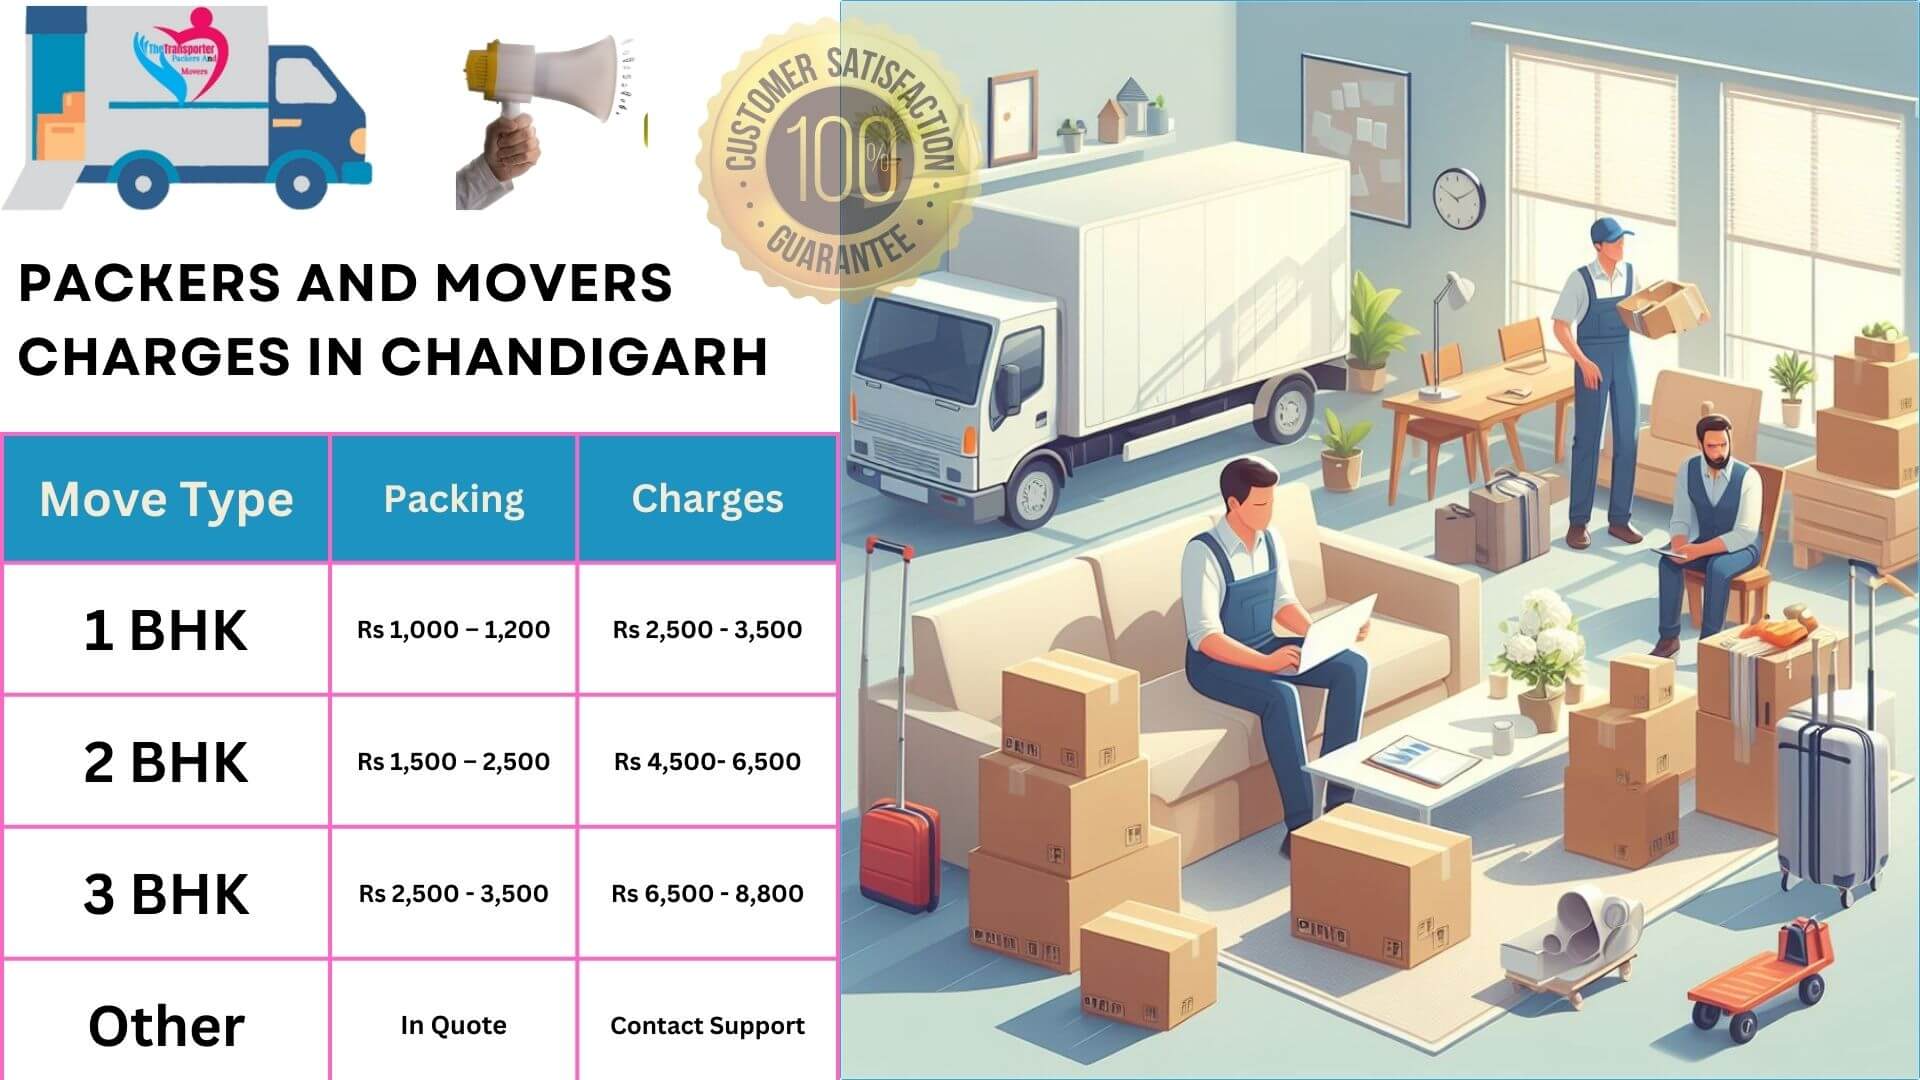 TheTransporter Packers and movers Charges list in Chandigarh 